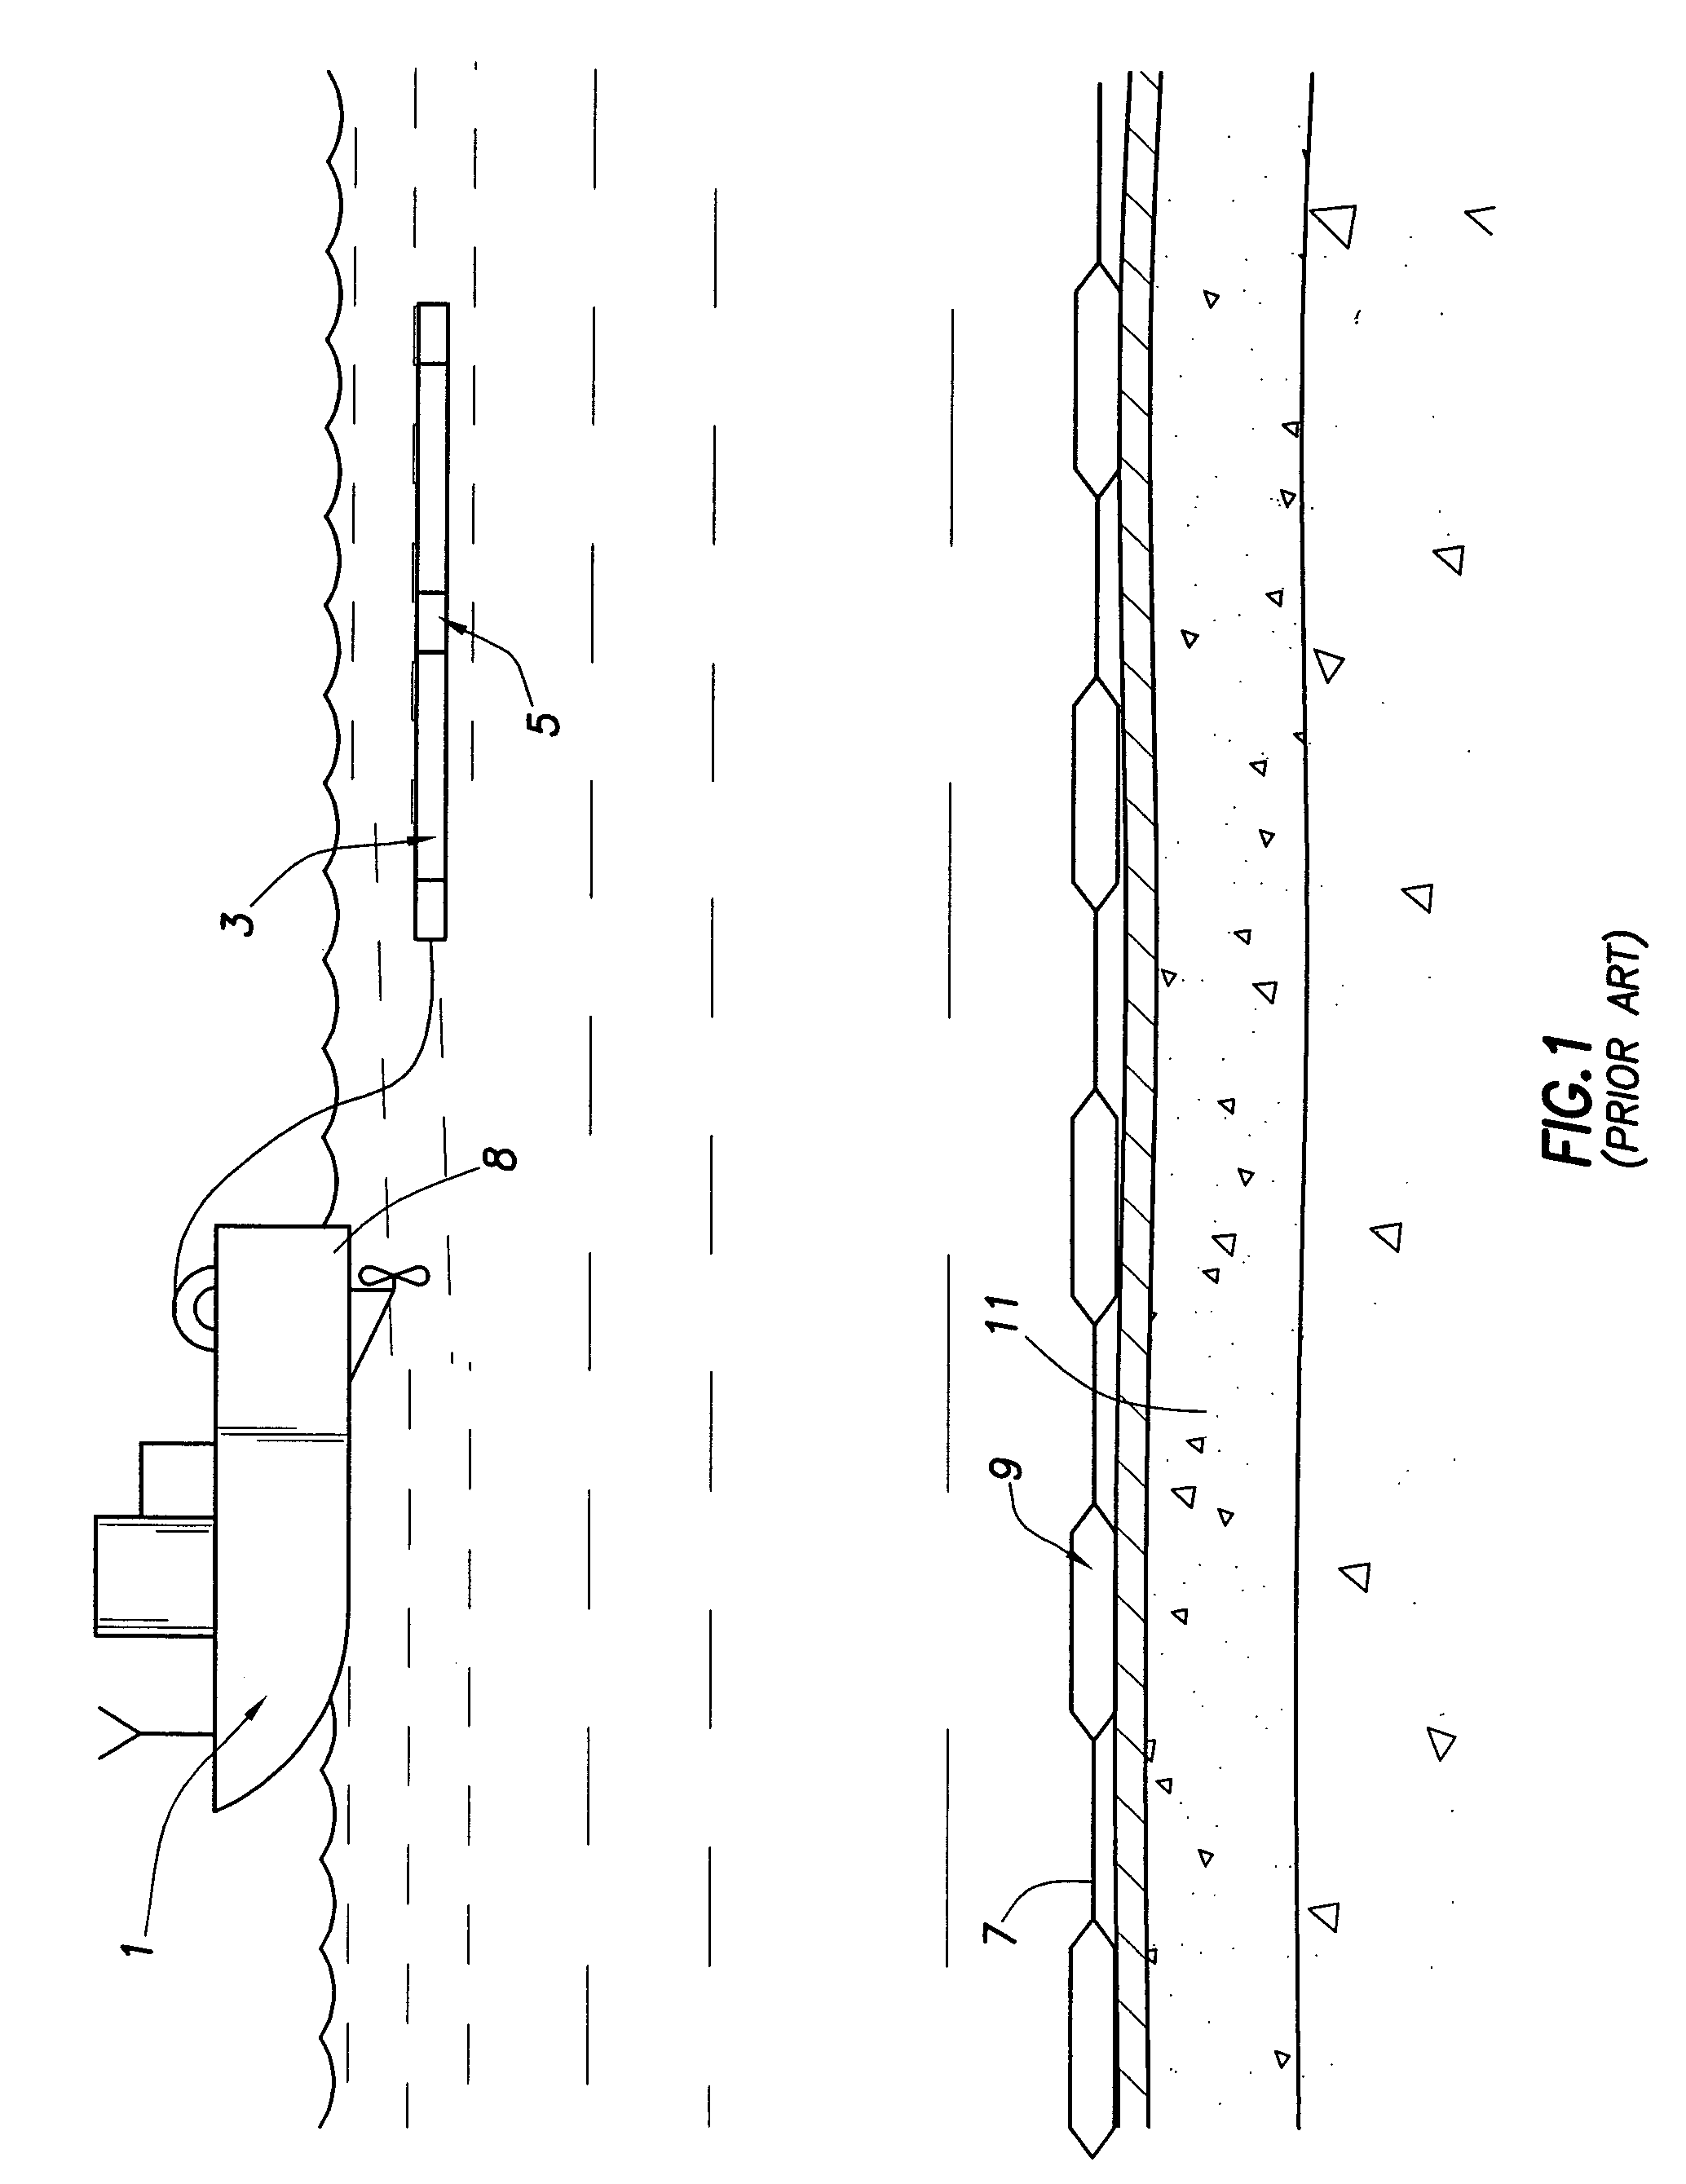 Subsurface conductivity imaging systems and methods